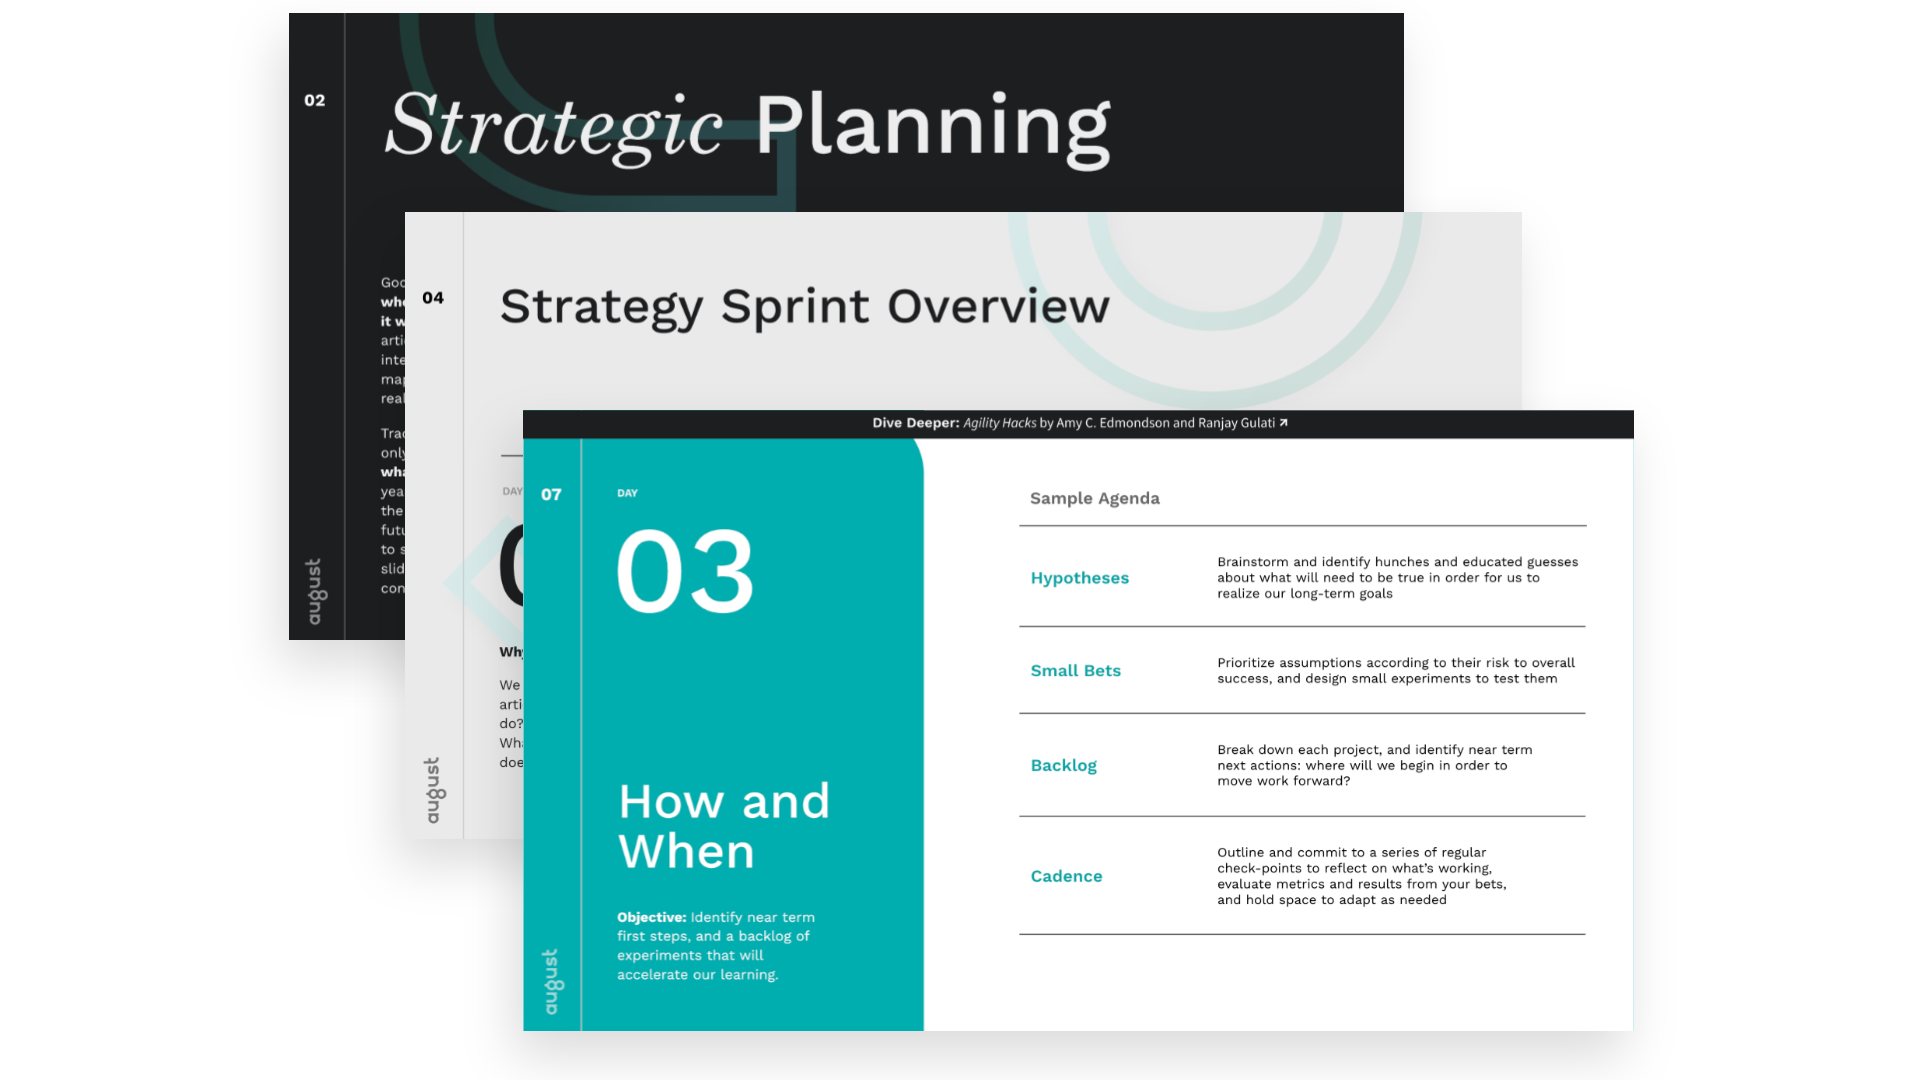 Your traditional strategic planning process isn’t working. A Strategy Sprint can help.